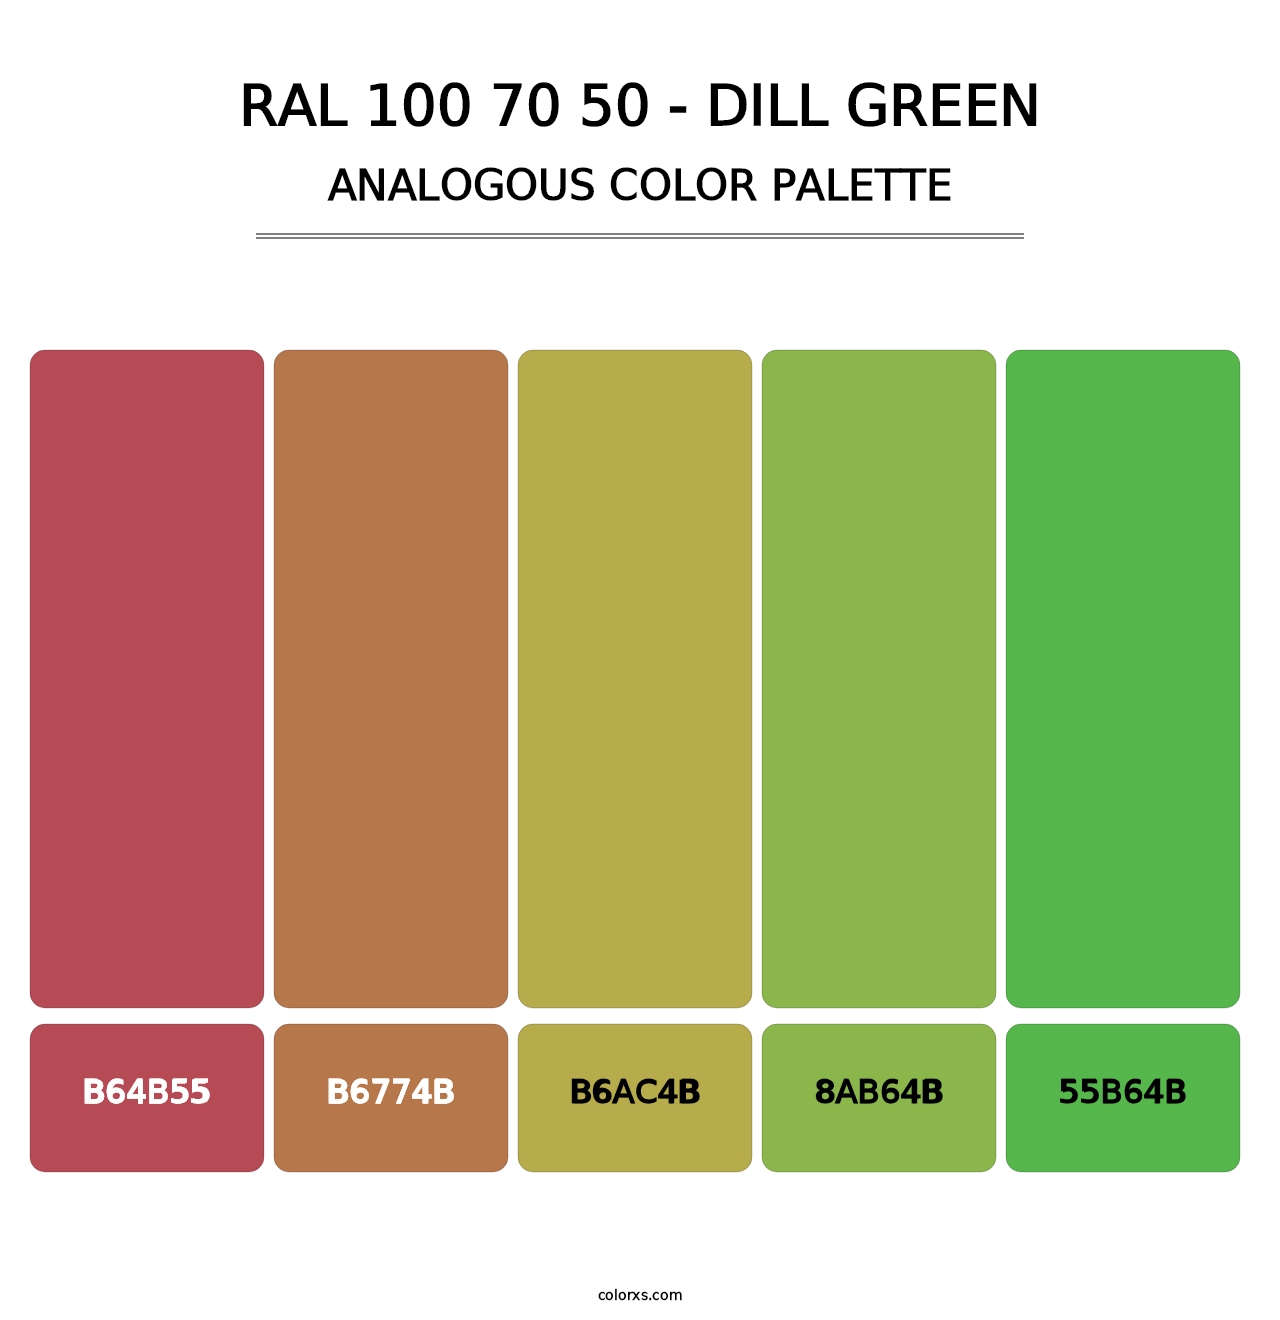 RAL 100 70 50 - Dill Green - Analogous Color Palette